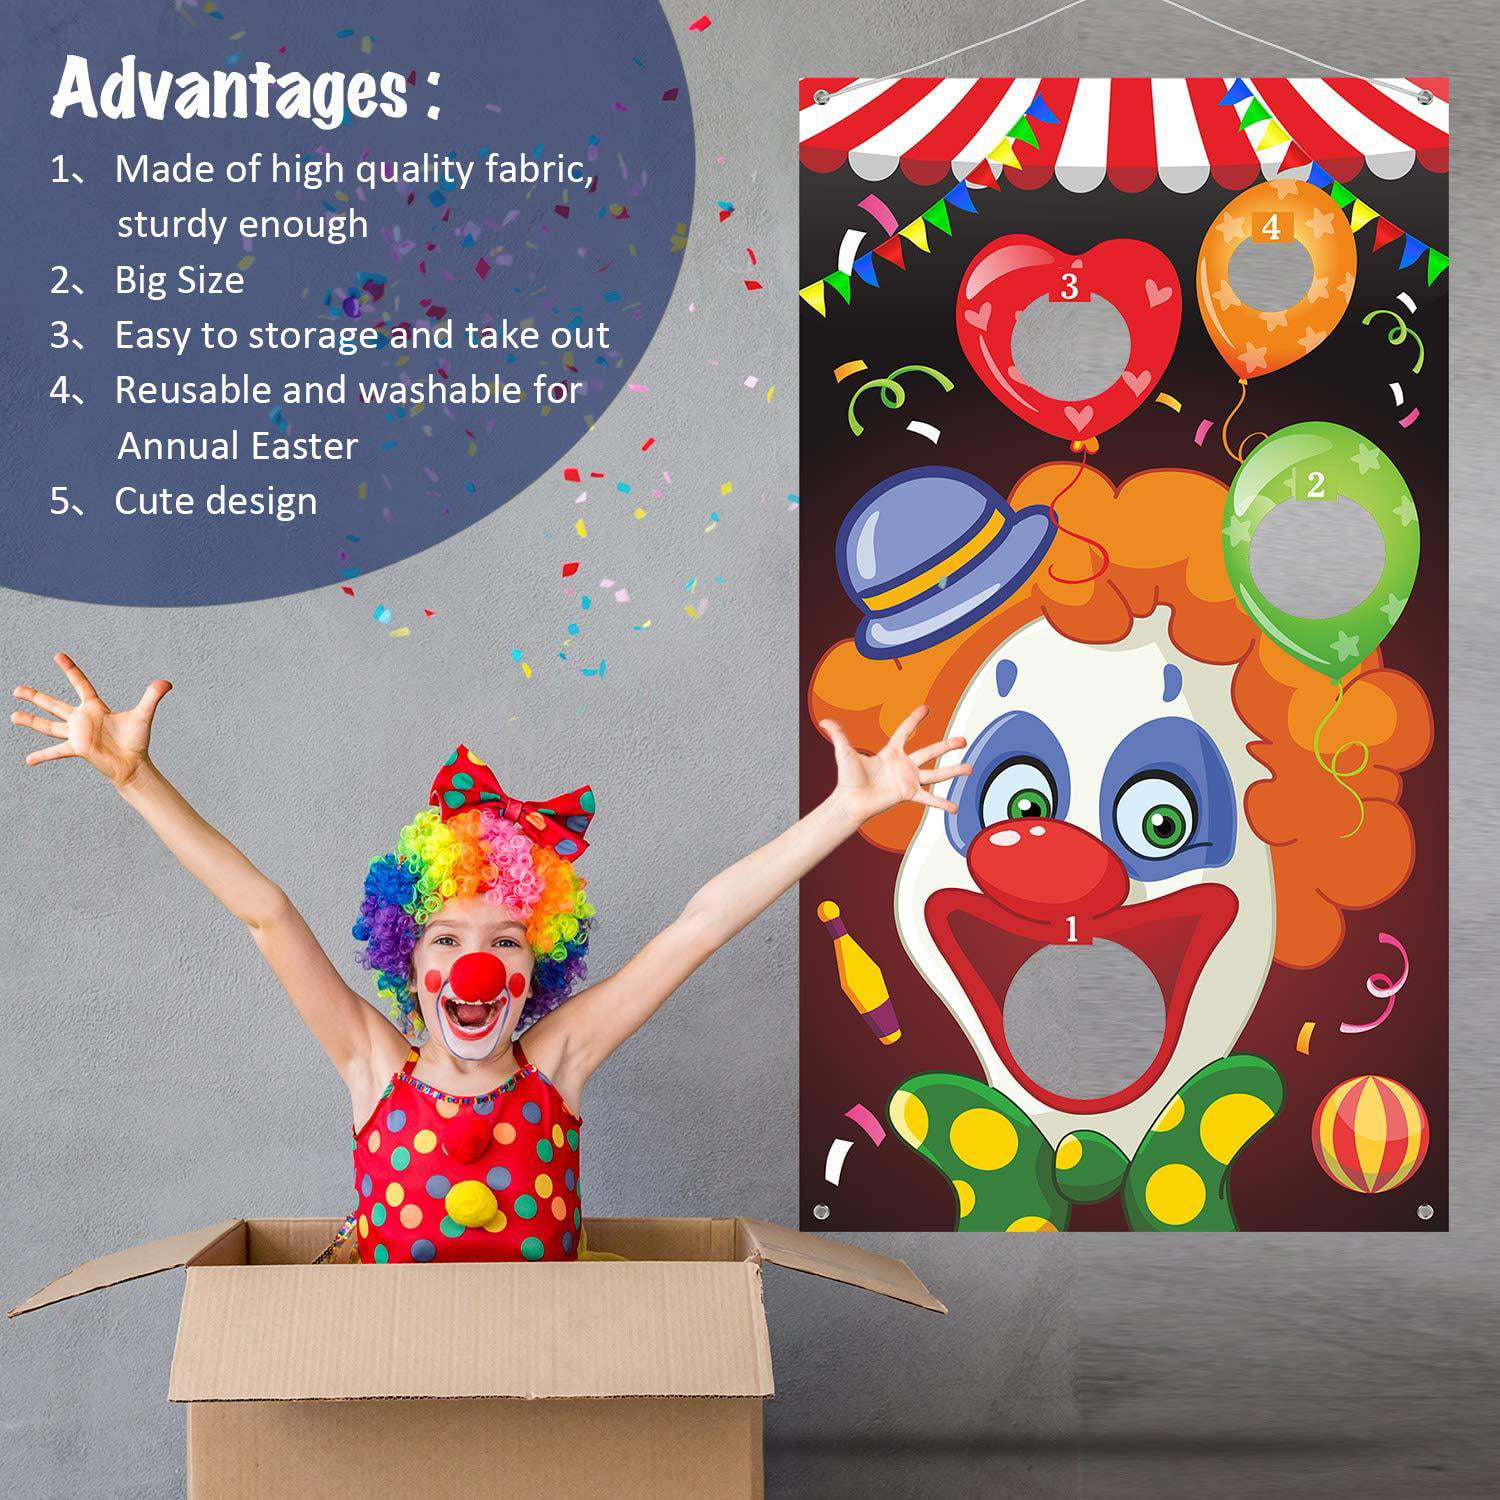 URATOT Carnival Toss Games with 4 Colorful Bean Bag Style 1 Fun Carnival Game for Kids and Adults in Carnival Party Birthday Circus Activities Decorations and Suppliers 